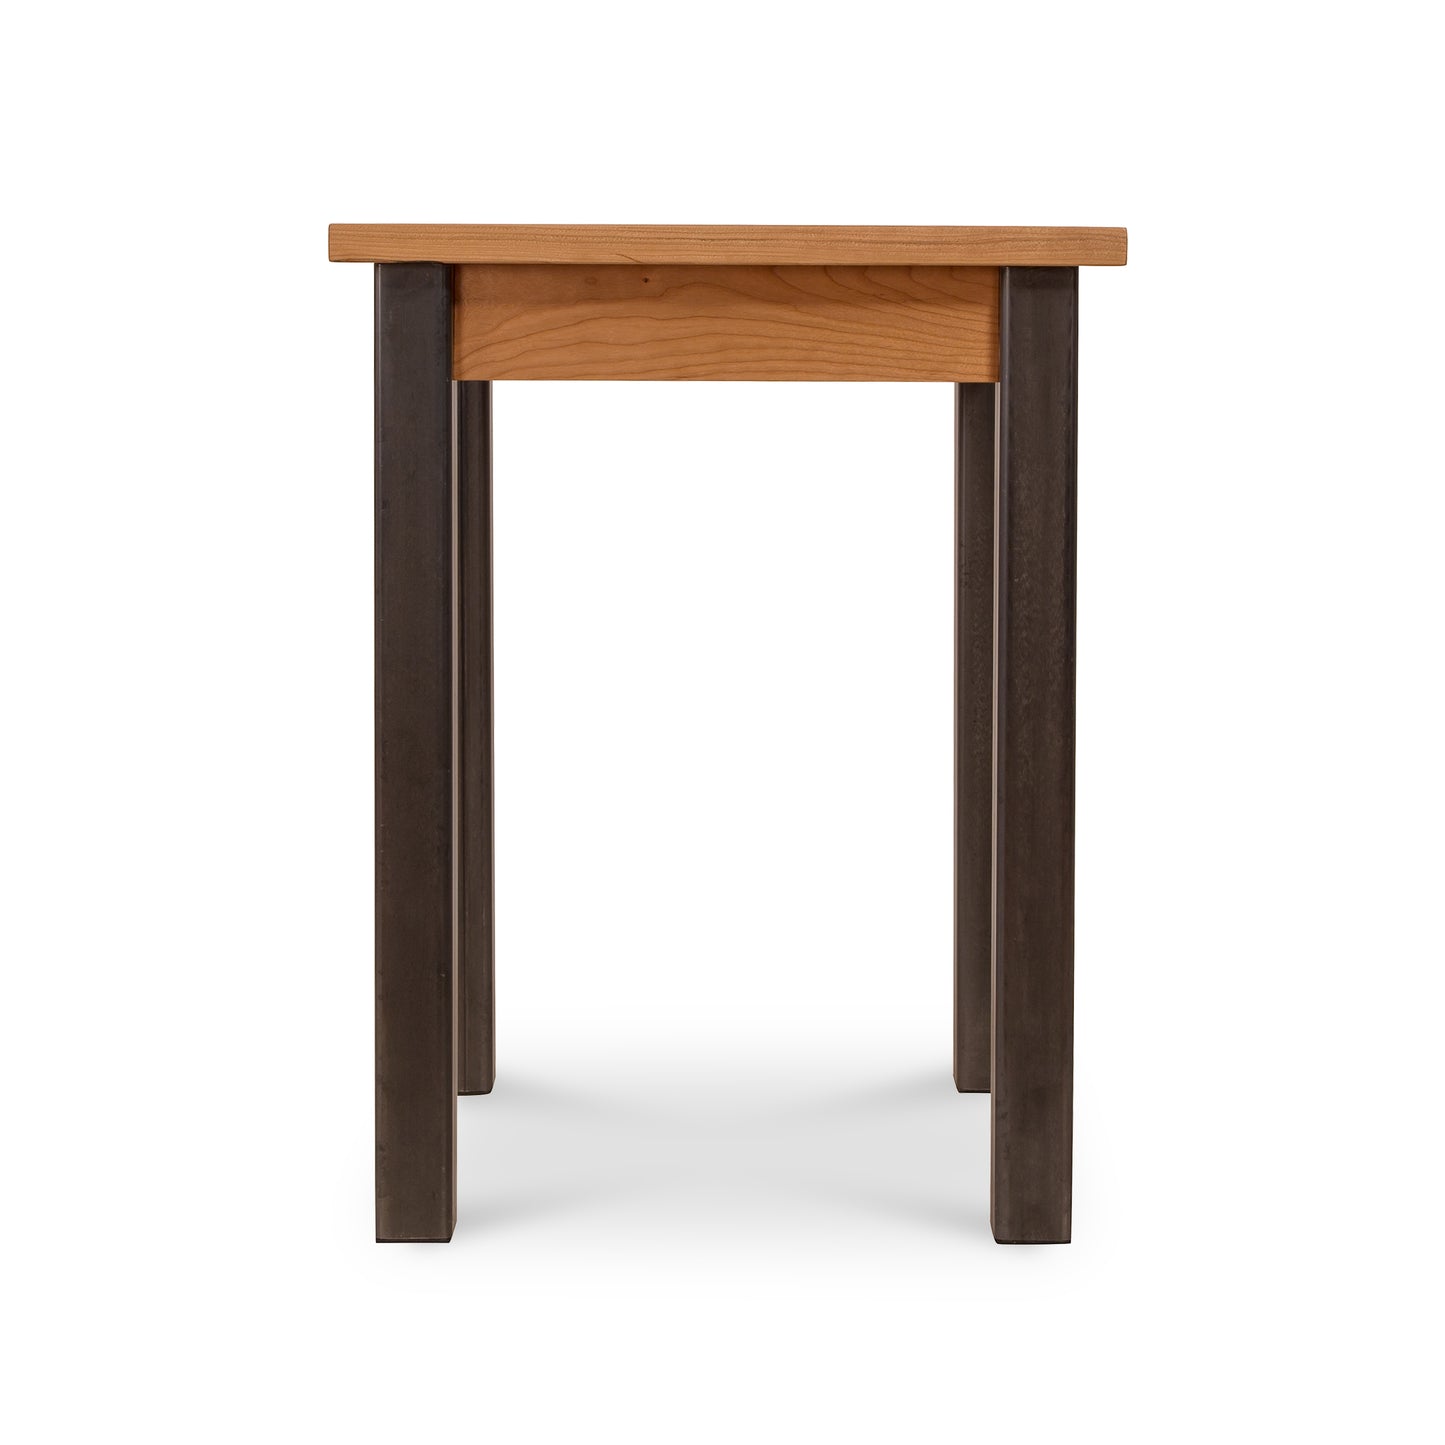 This Lyndon Furniture Contemporary Farmhouse End Table - Clearance features a wooden top and black legs.